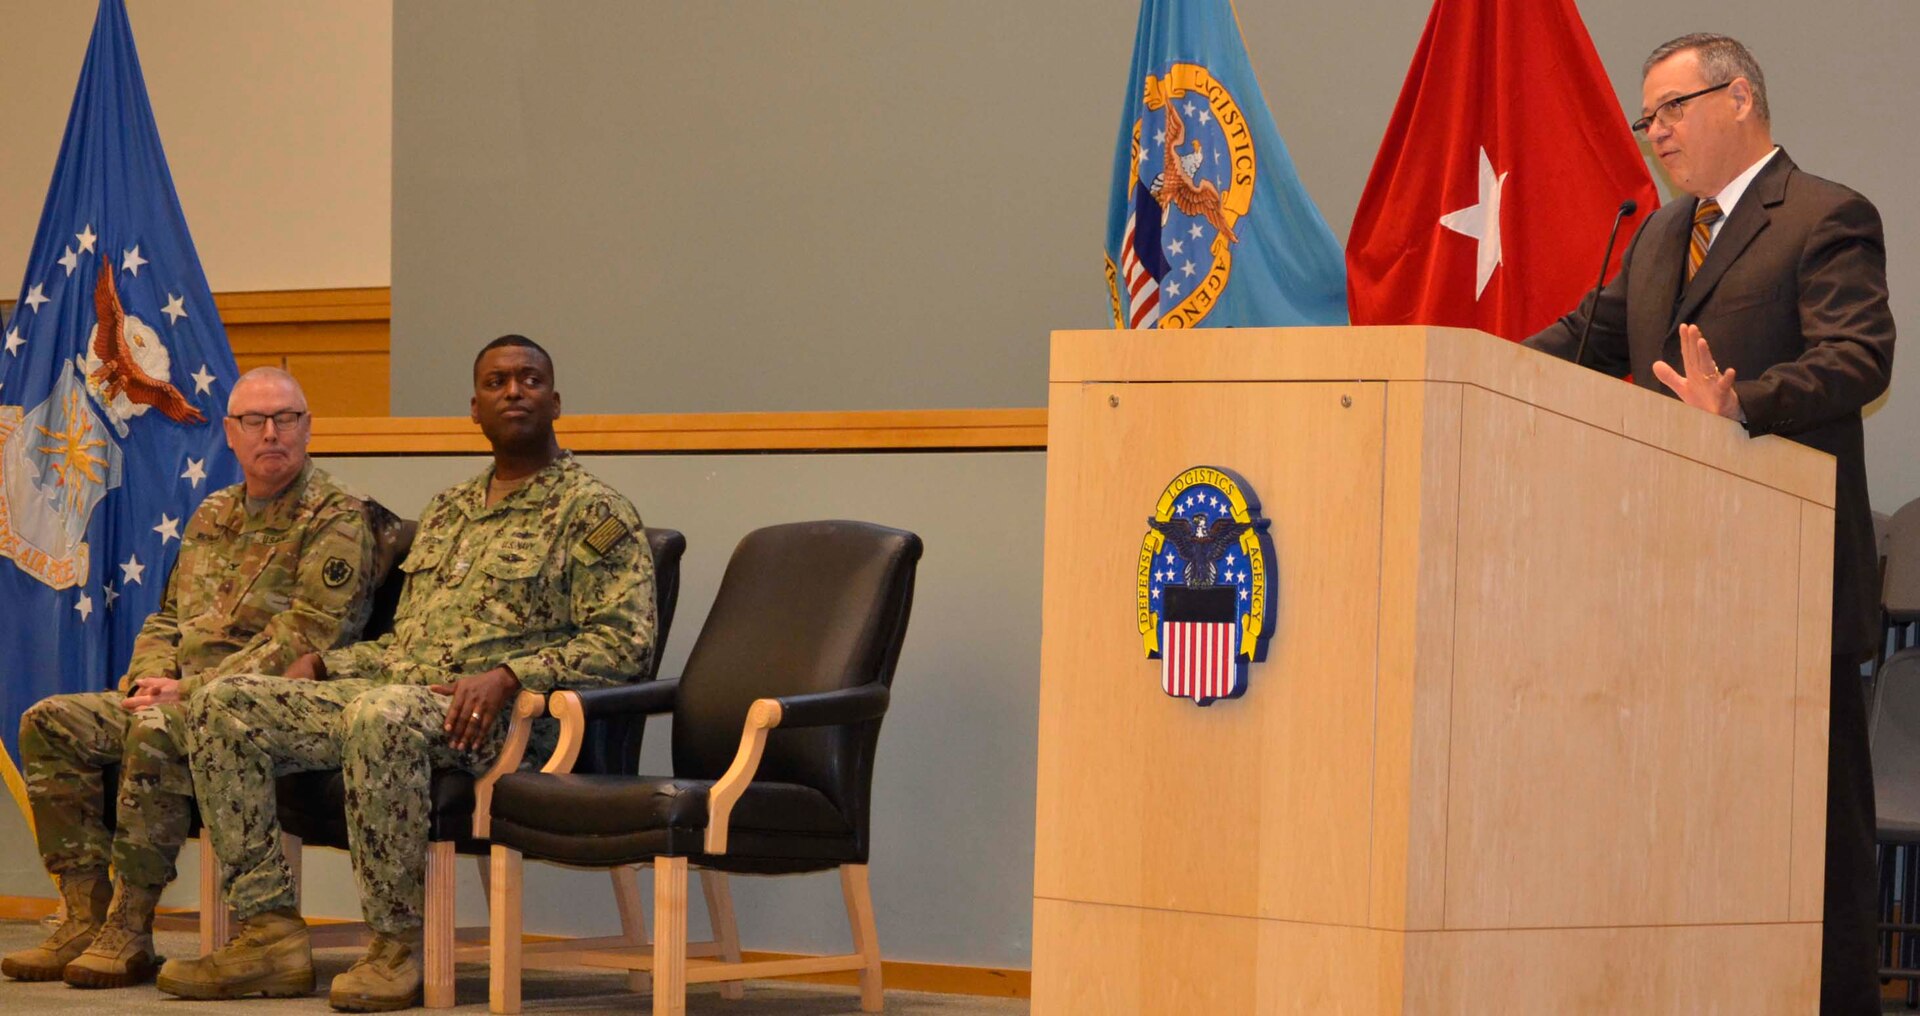 DLA Troop Support Deputy Commander Richard Ellis, right, shares personal testimony regarding the importance of resilience and work-life balance with employees alongside Procurement Process Support Director Navy Capt. James Gayton, center, and DLA Chaplain Army Col. Robert Wichman Nov. 21, 2019, in Philadelphia.